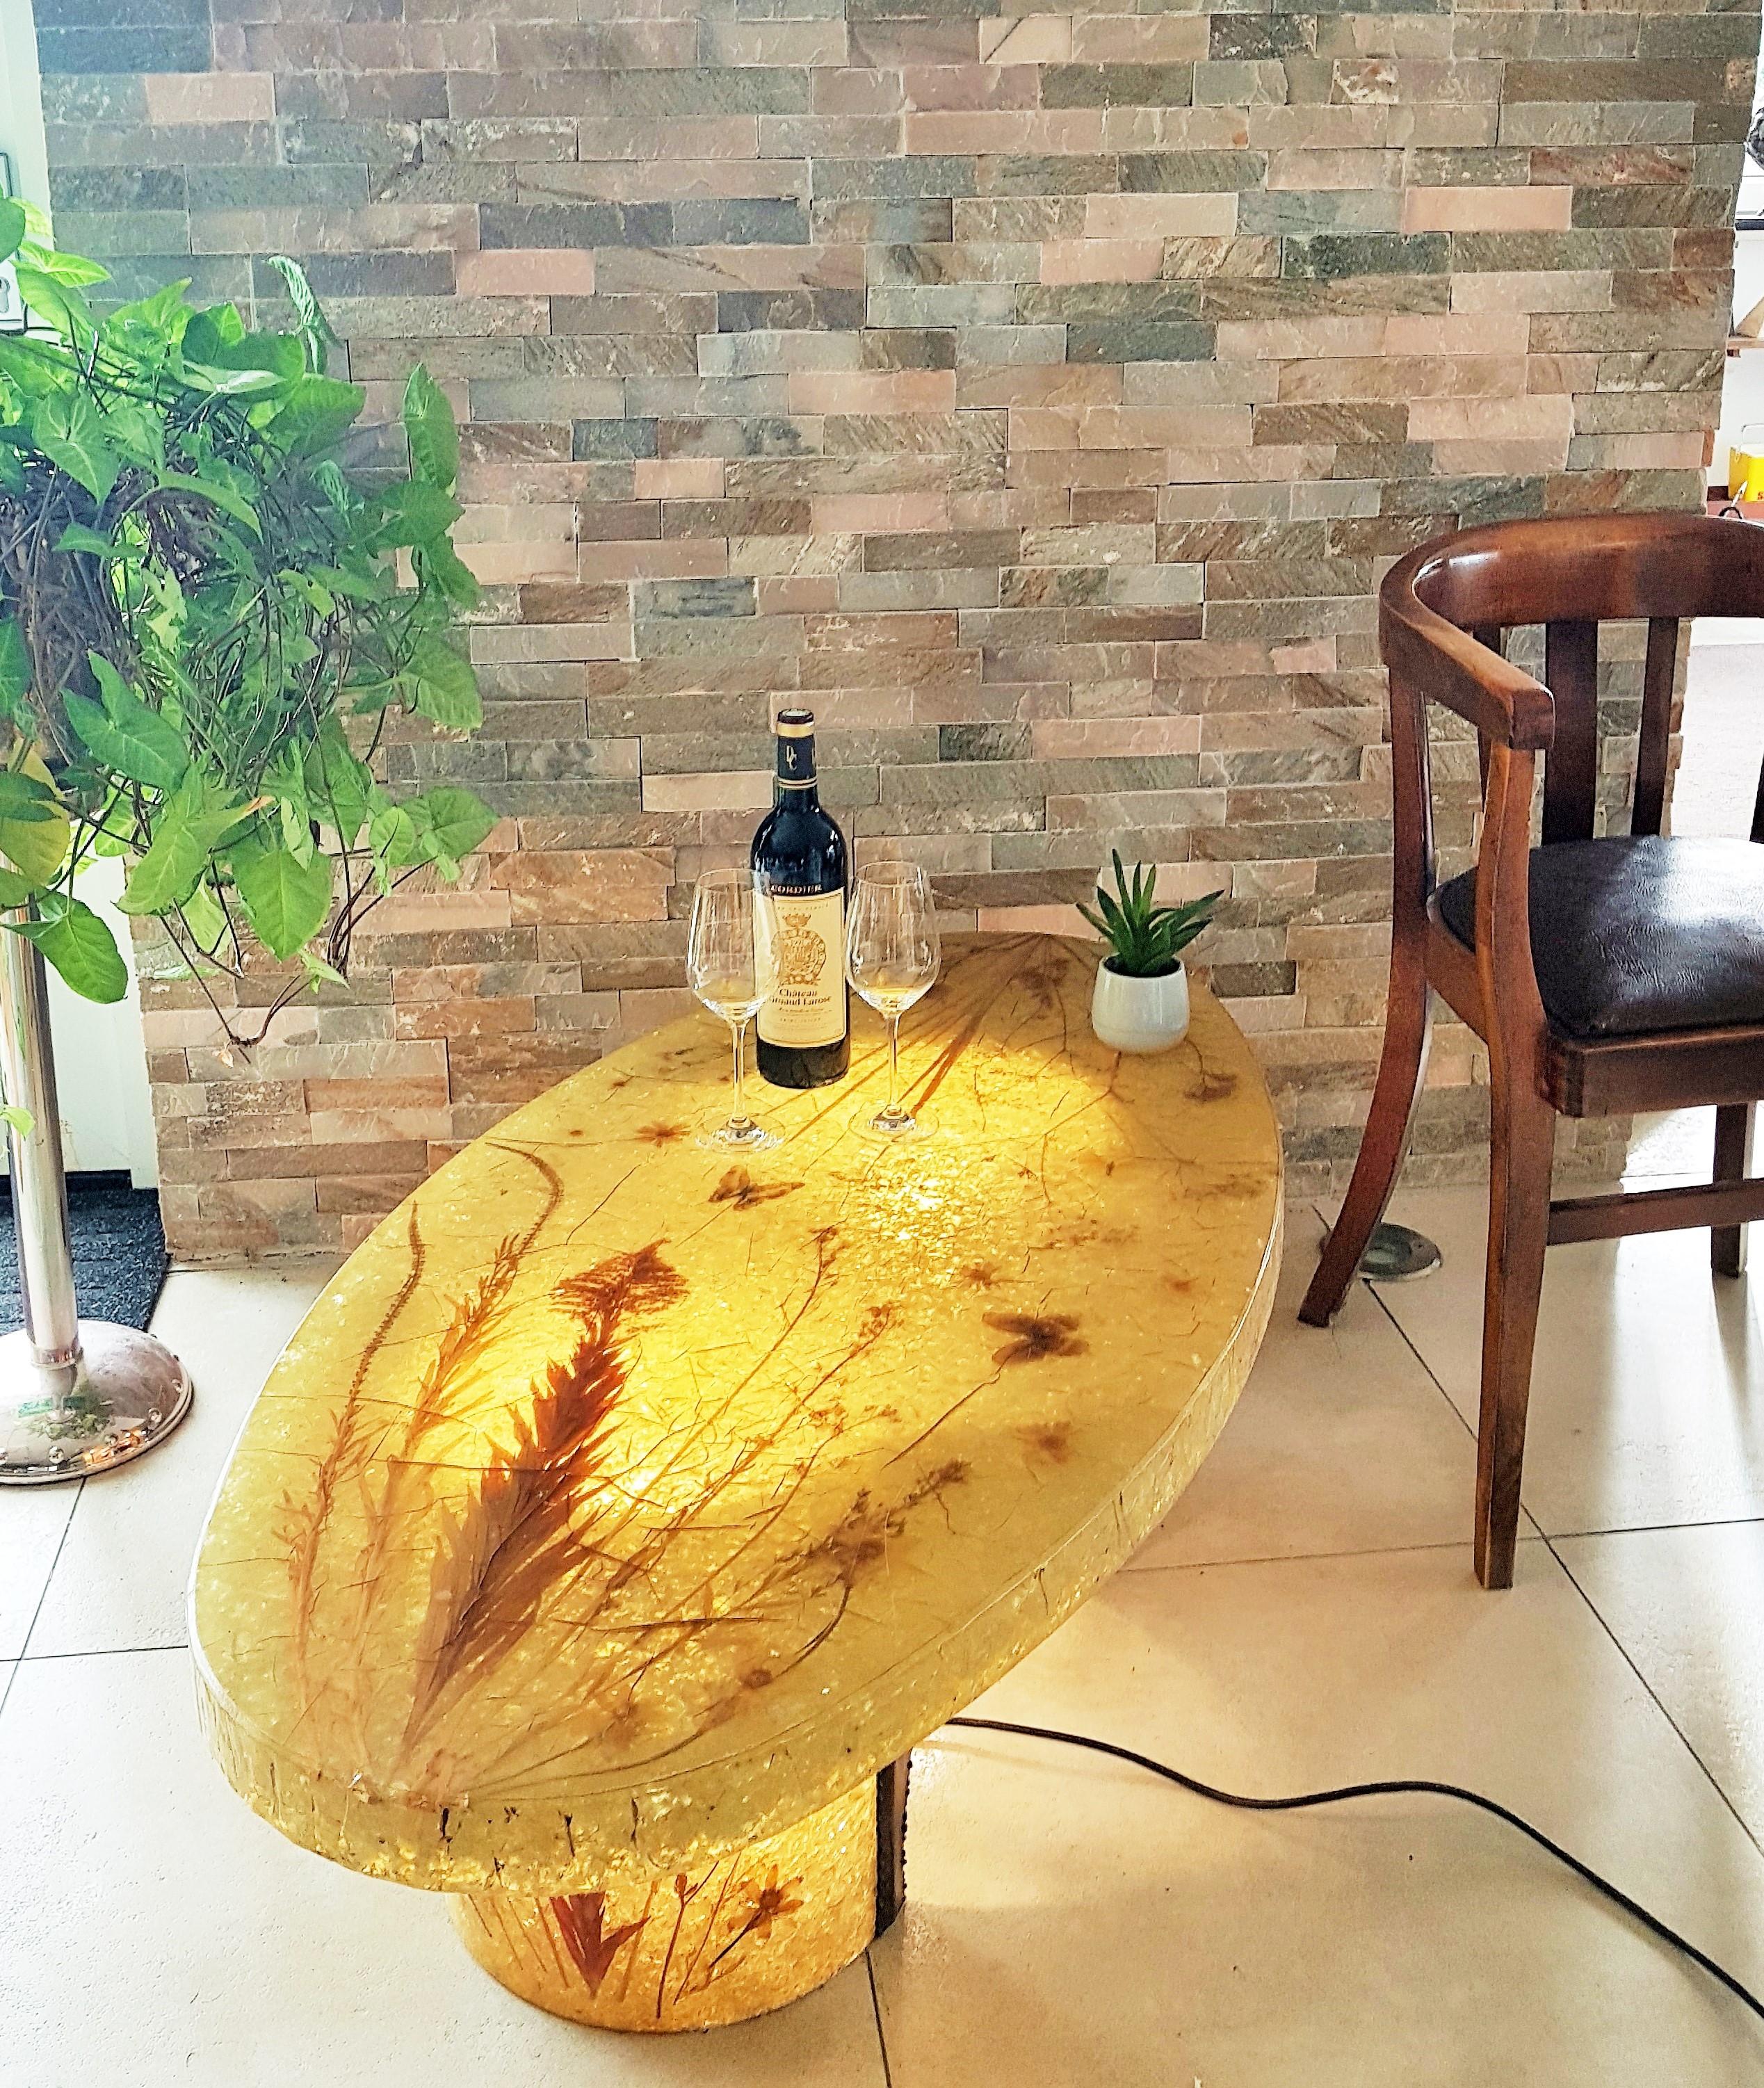 Brutalist. Midcentury illuminated resin coffee side table from Accolay, France.

Naturalistic illuminating coffee table made by D'accolay in France during the 1960s.
The crackled resin top contains real natural elements such as butterflies,